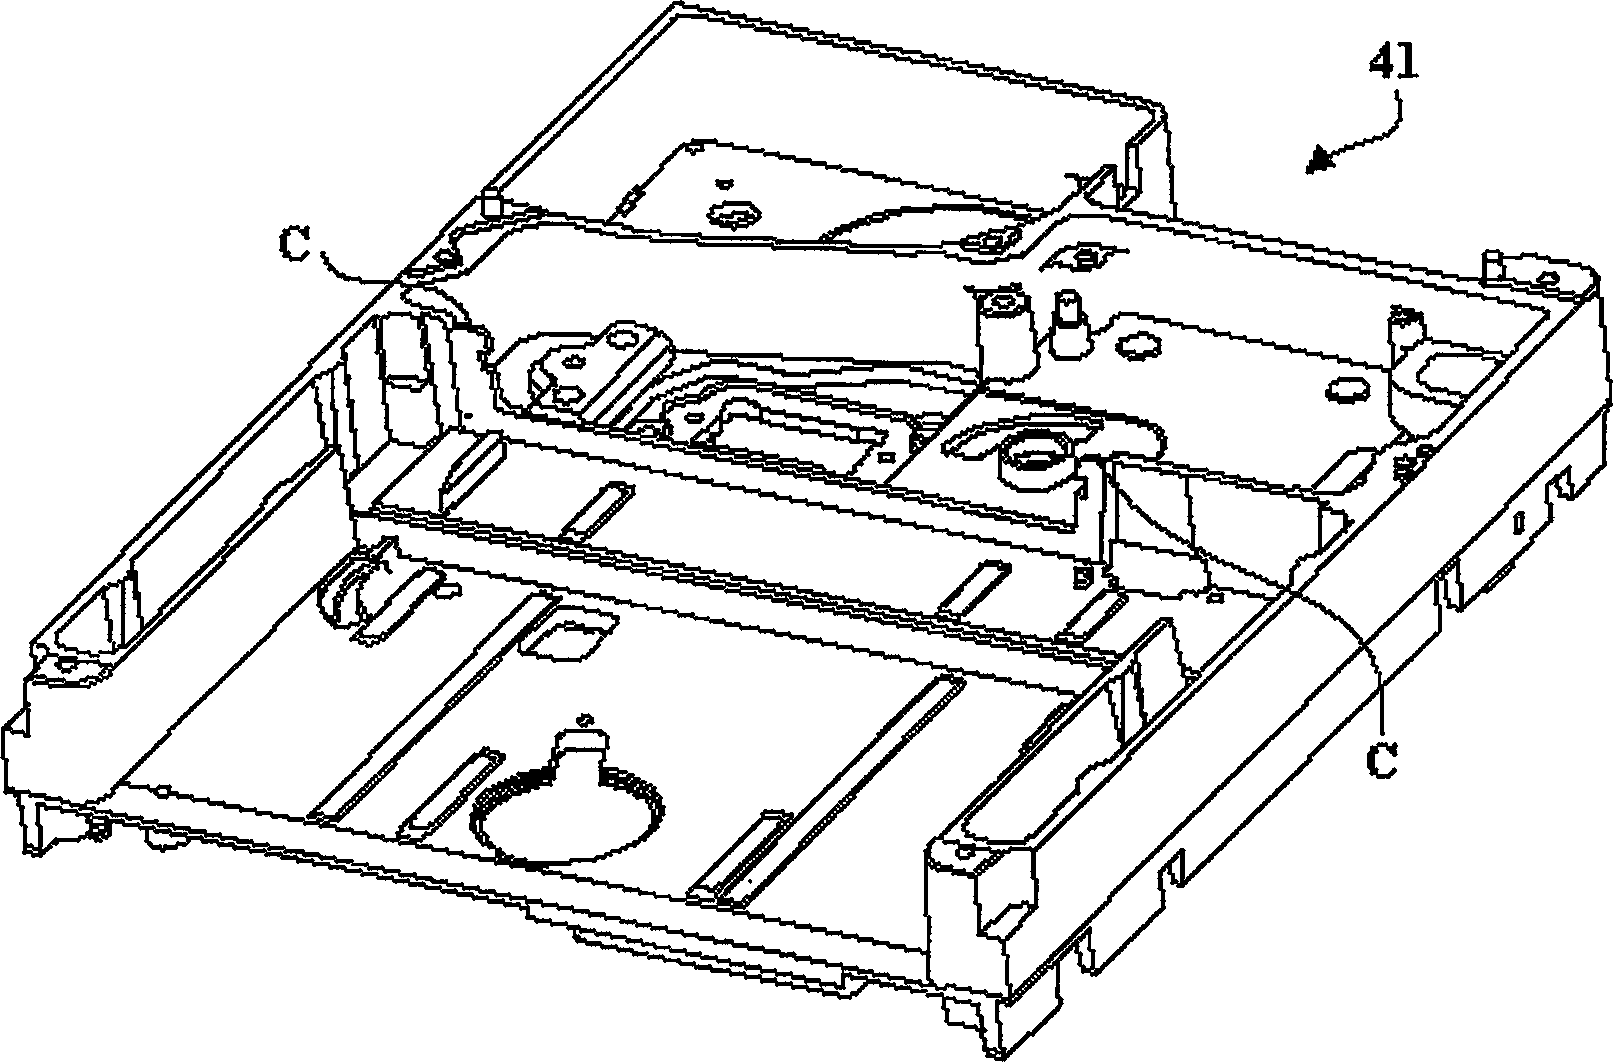 Equipment for automatic riveting butt jointed seal ring of separability type hard disk drive